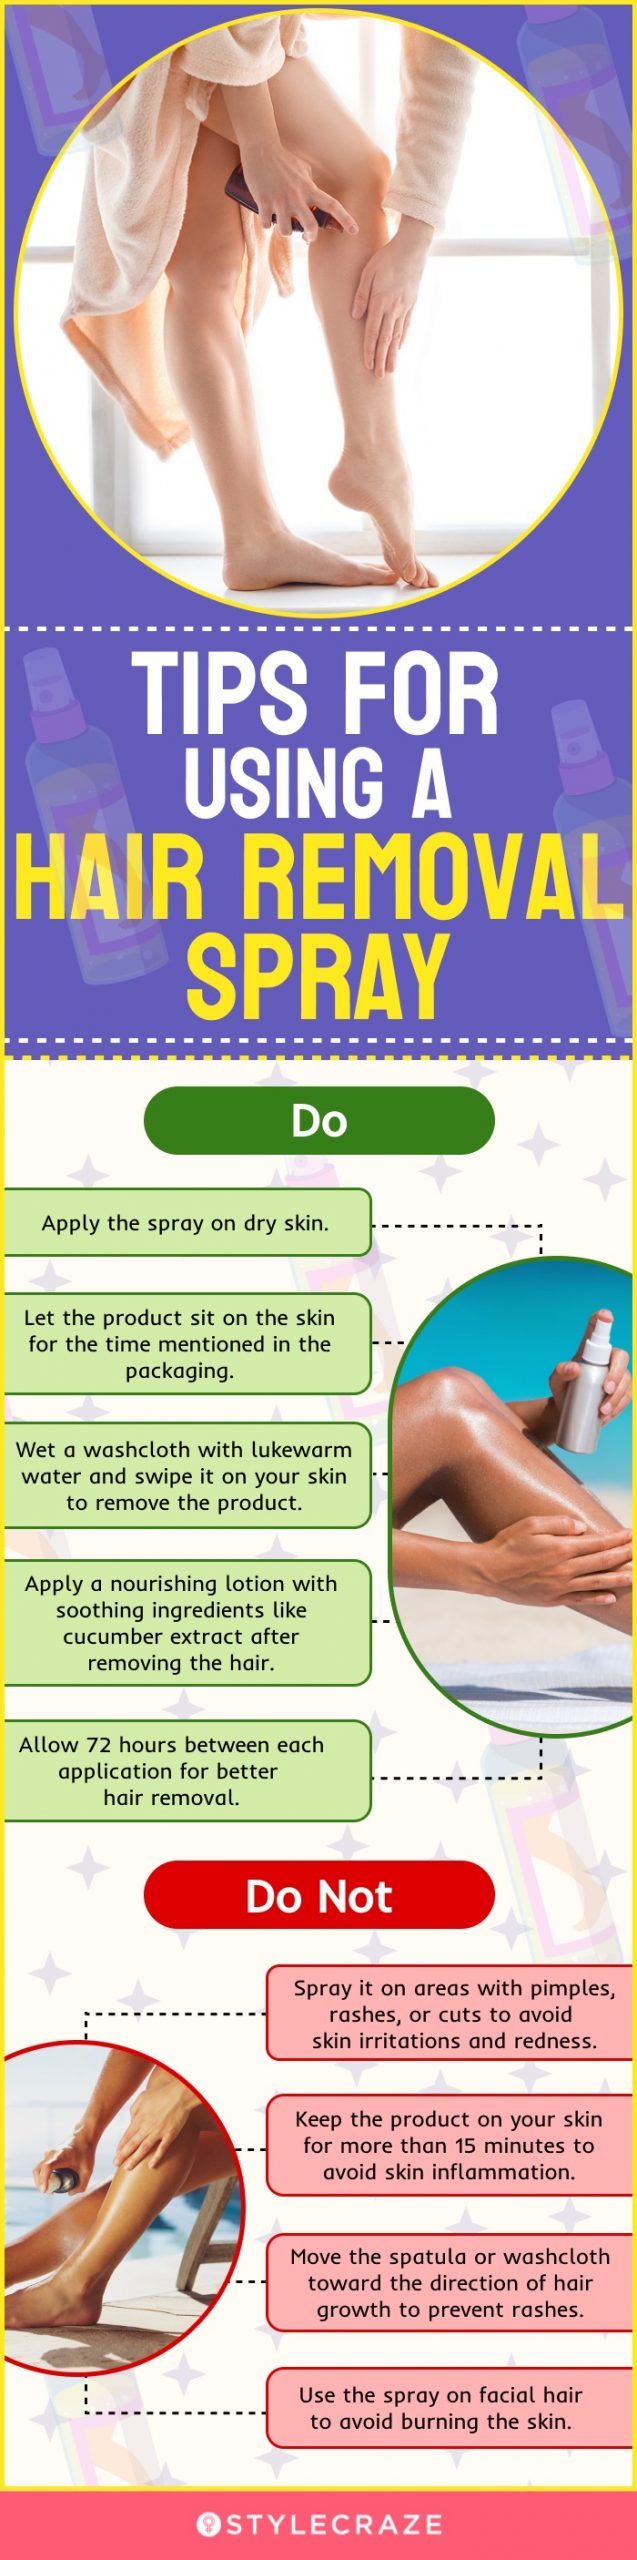 Tips For Using A Hair Removal Spray (infographic)